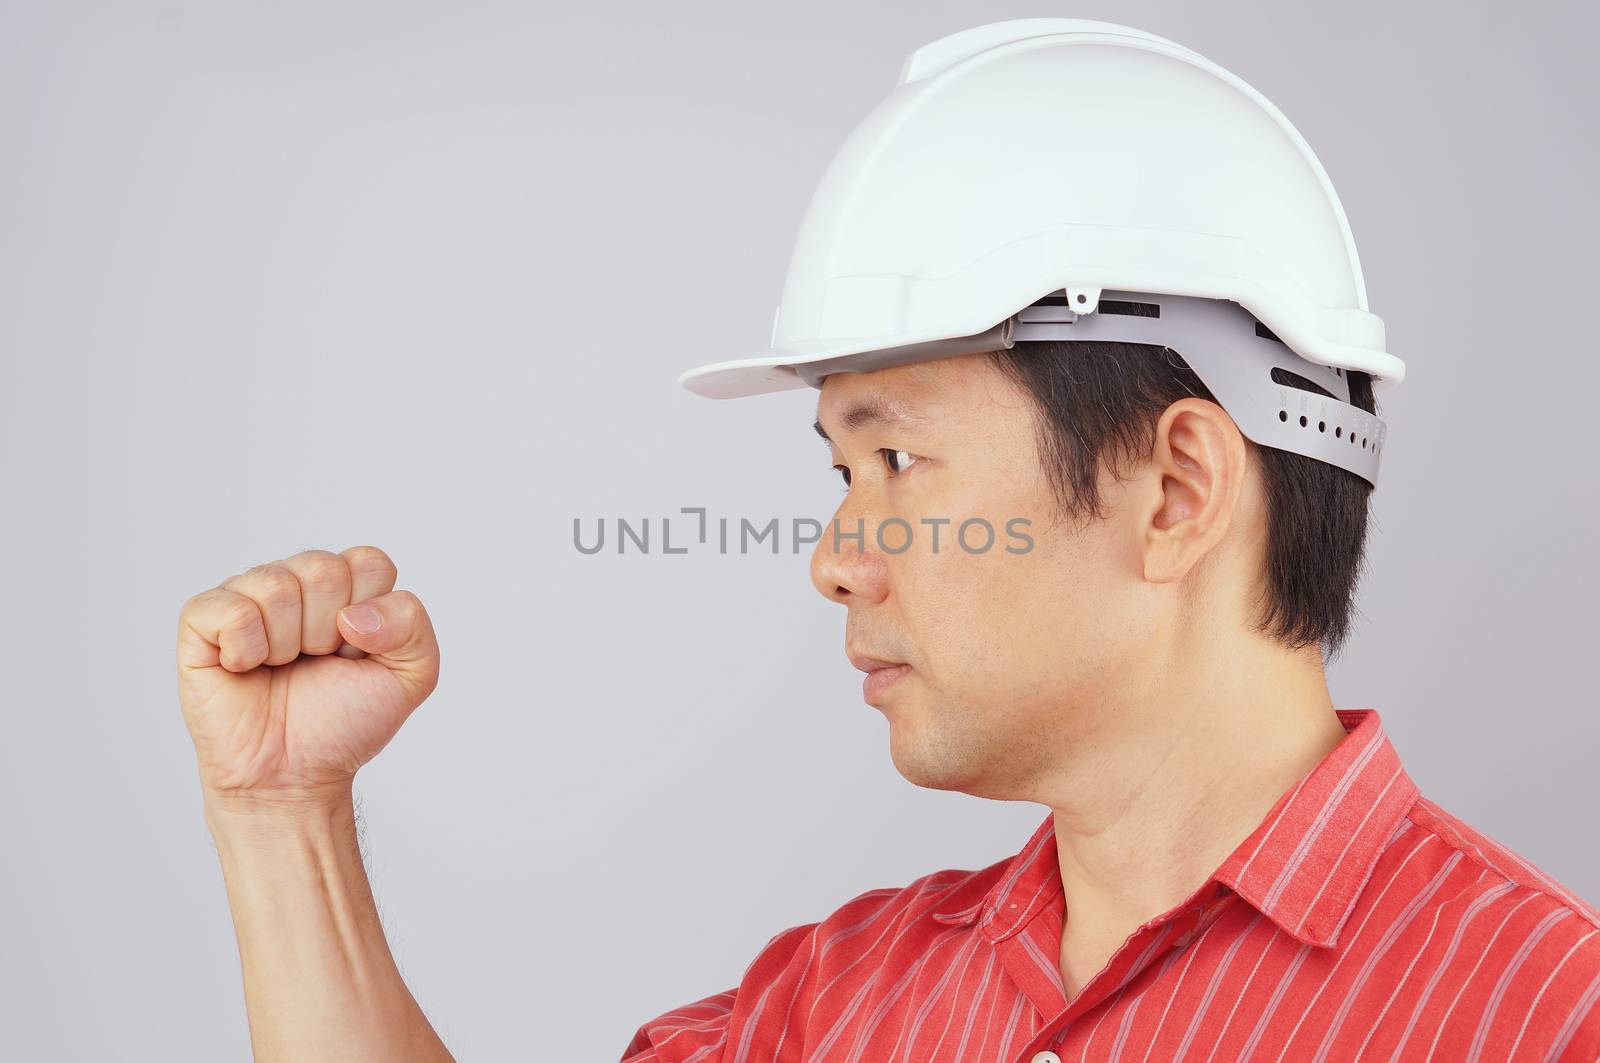 Engineer wear red shirt and white engineer hat make signal by fist on white background.